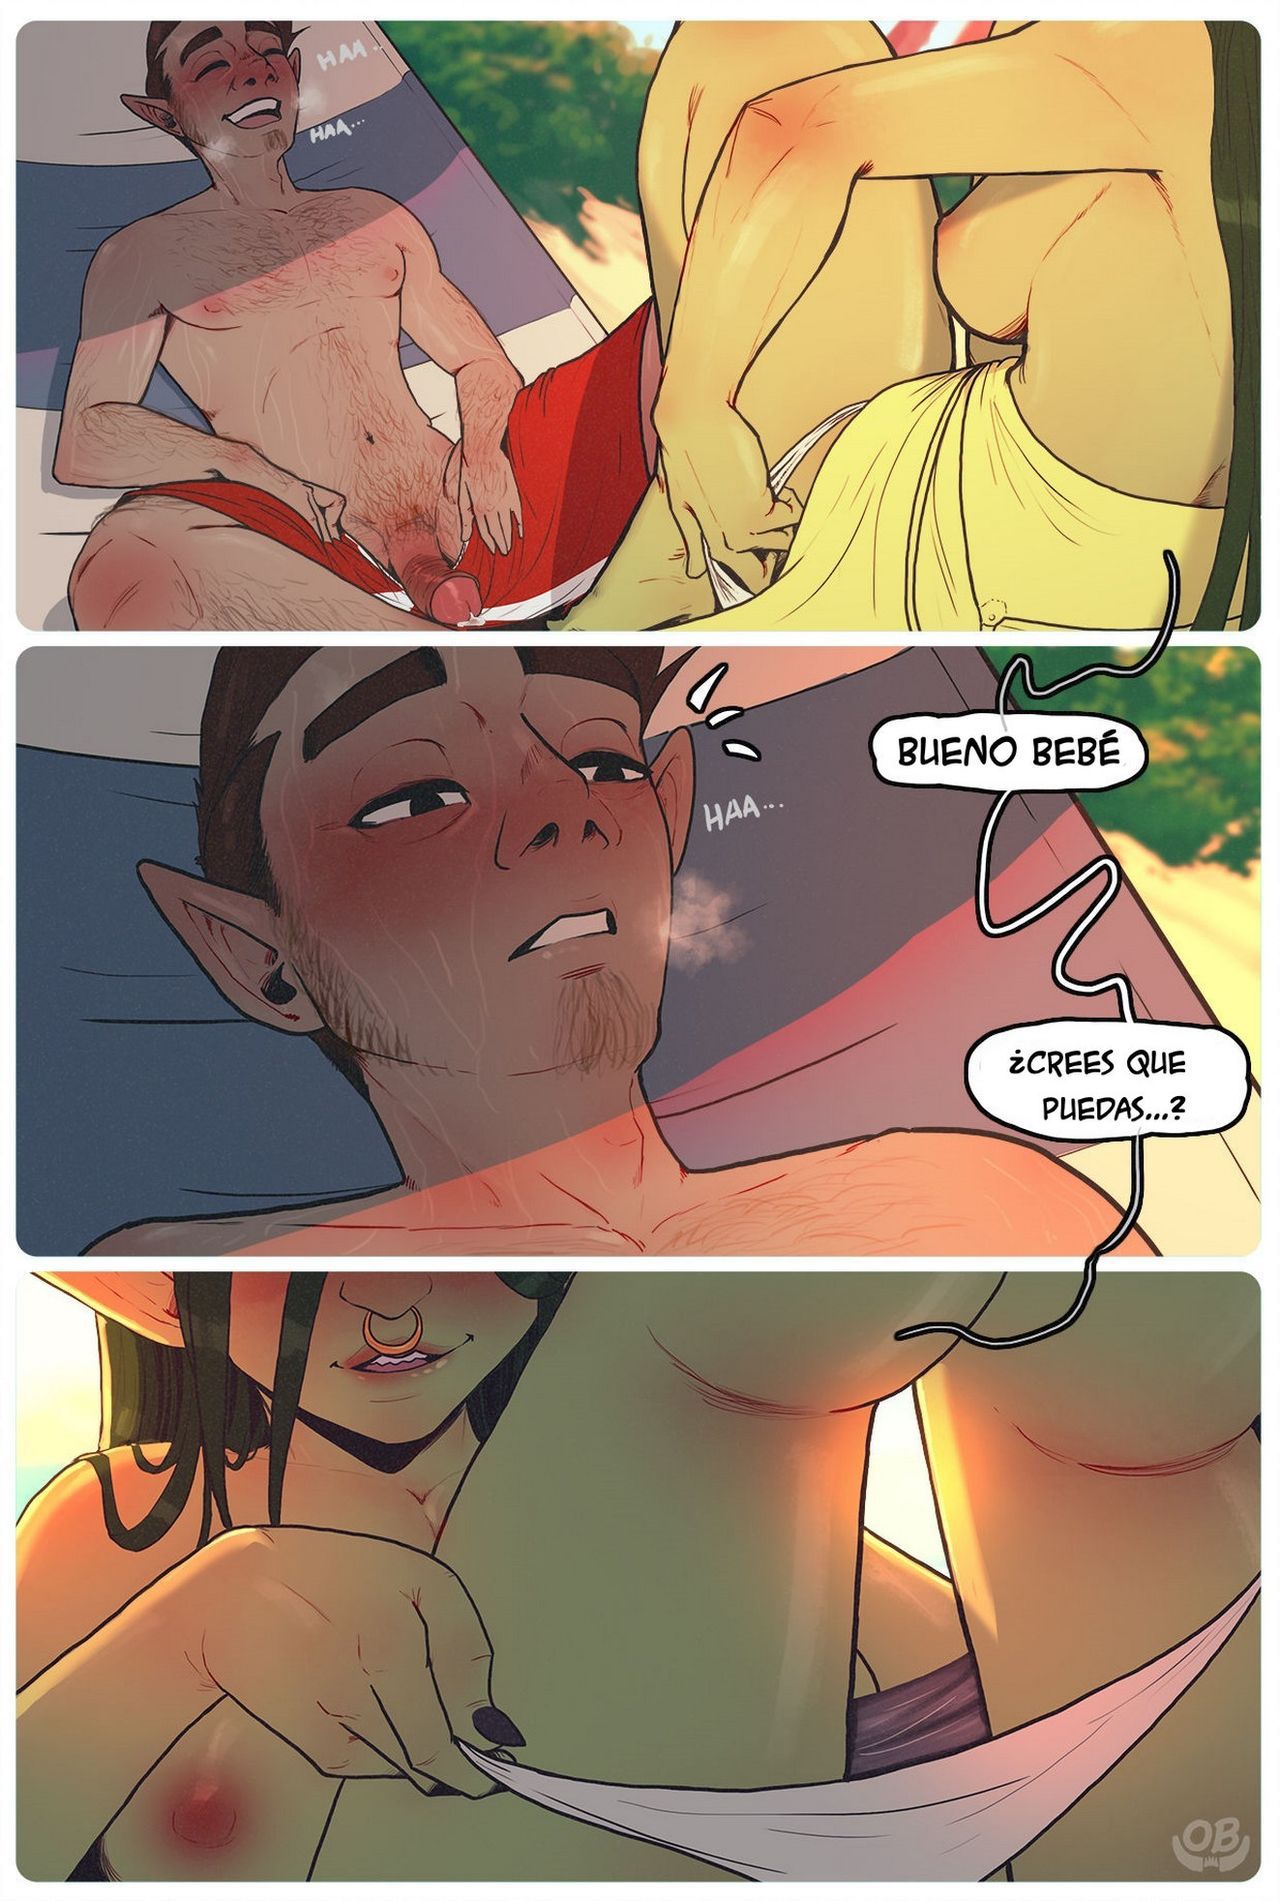 [Orcbarbies] Beach Day in Xhorhas [Ongoing] [Spanish] 19